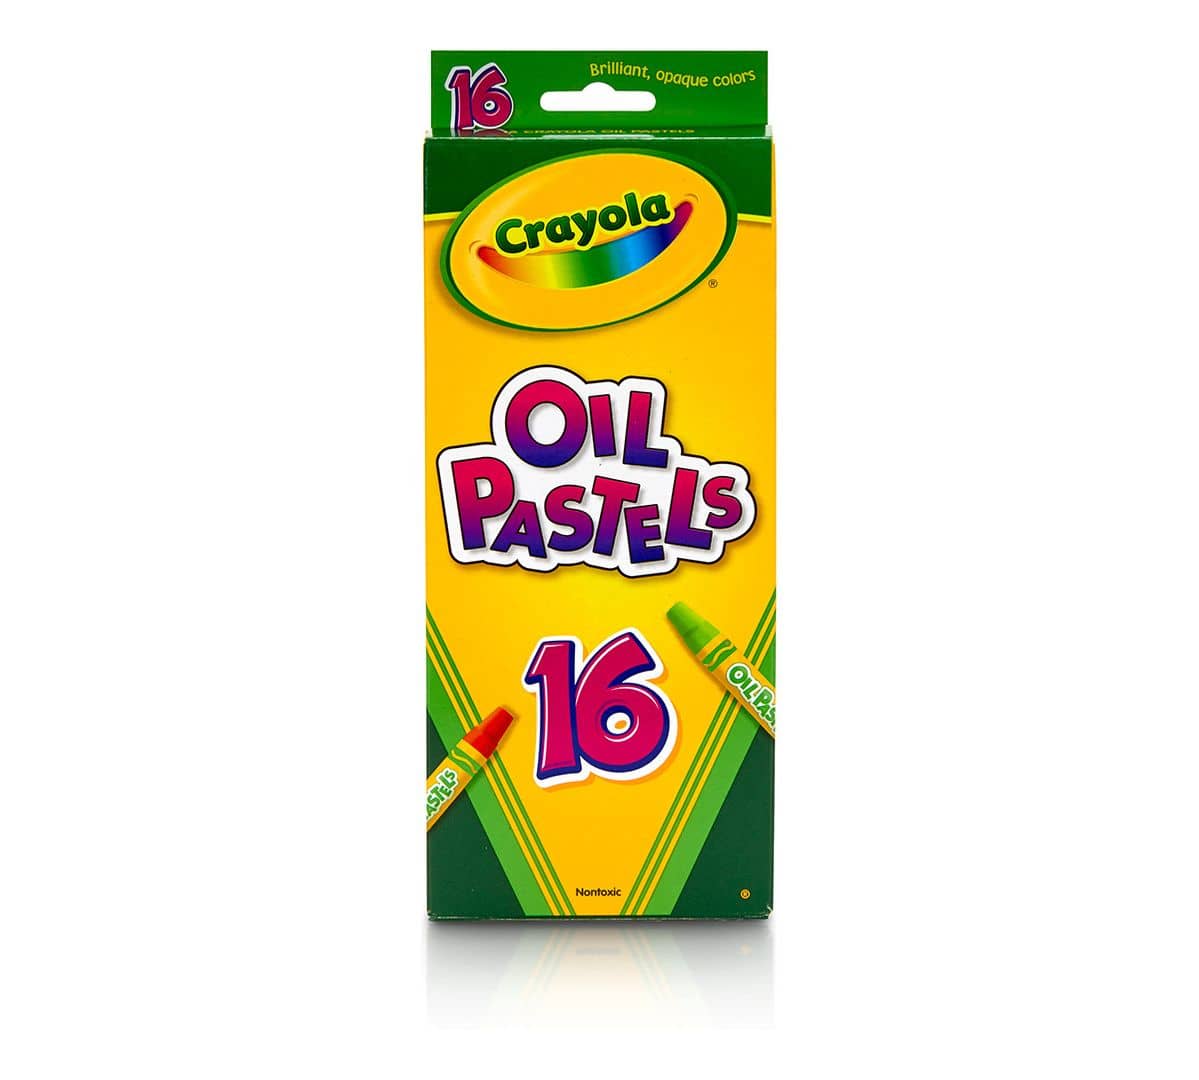 Crayola Oil Pastels 16 Colors